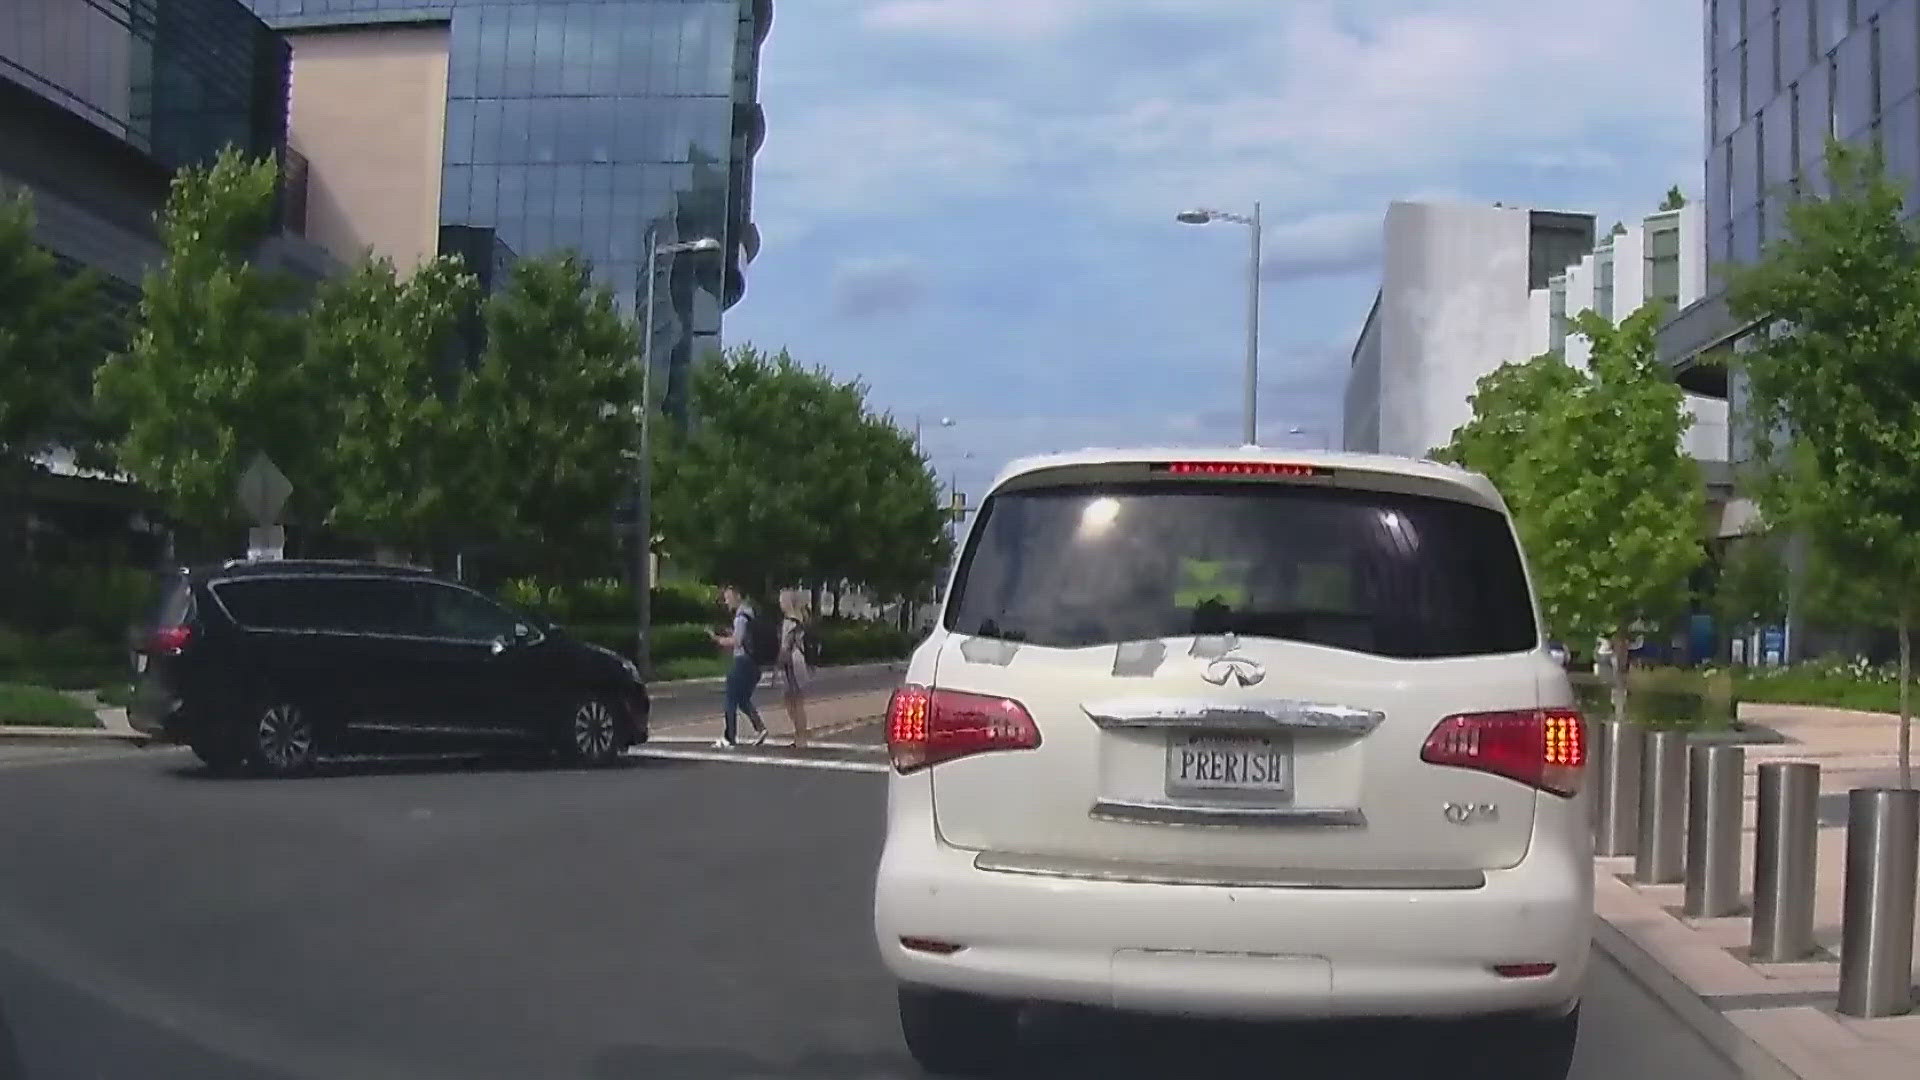 SHOCKING DASH CAMERA VIDEO SHOWS THE MOMENT TWO PEOPLE WERE HIT BY A VAN WHILE WALKING ALONG A CROSSWALK IN TYSONS VIRGINIA.